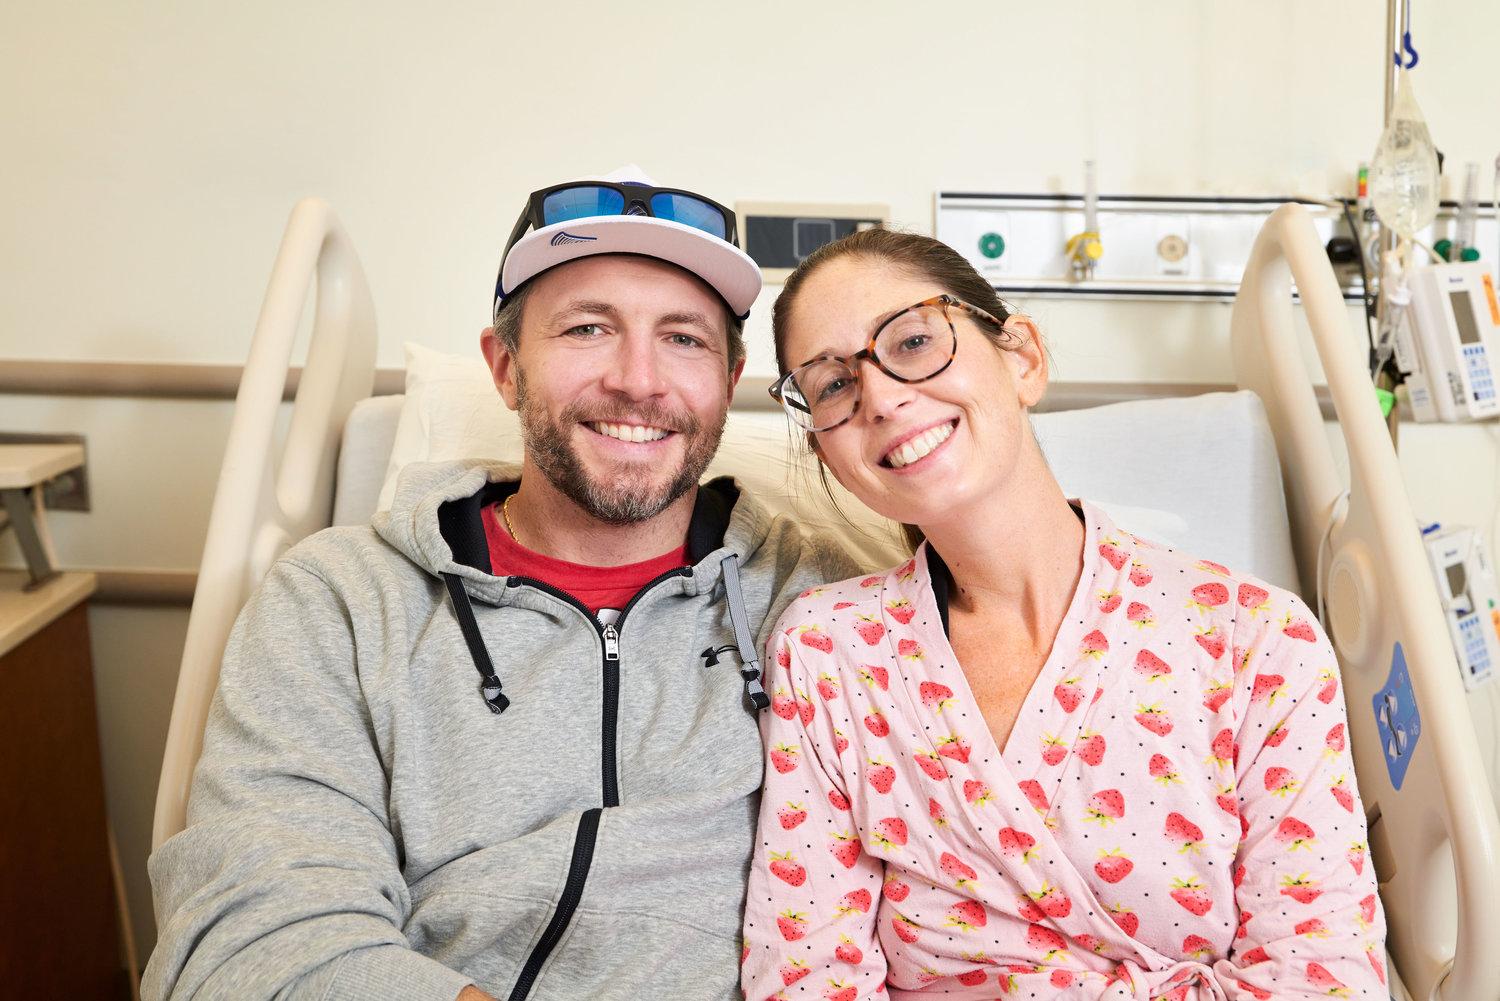 D.J. and Lauren Toby after their living organ transplant at New York-Presbyterian/Weill Cornell Medical Center. The couple, saved by love and blood type compatibility, will no longer have lingering ‘what if’ questions about Lauren’s PSC turning into cancer.